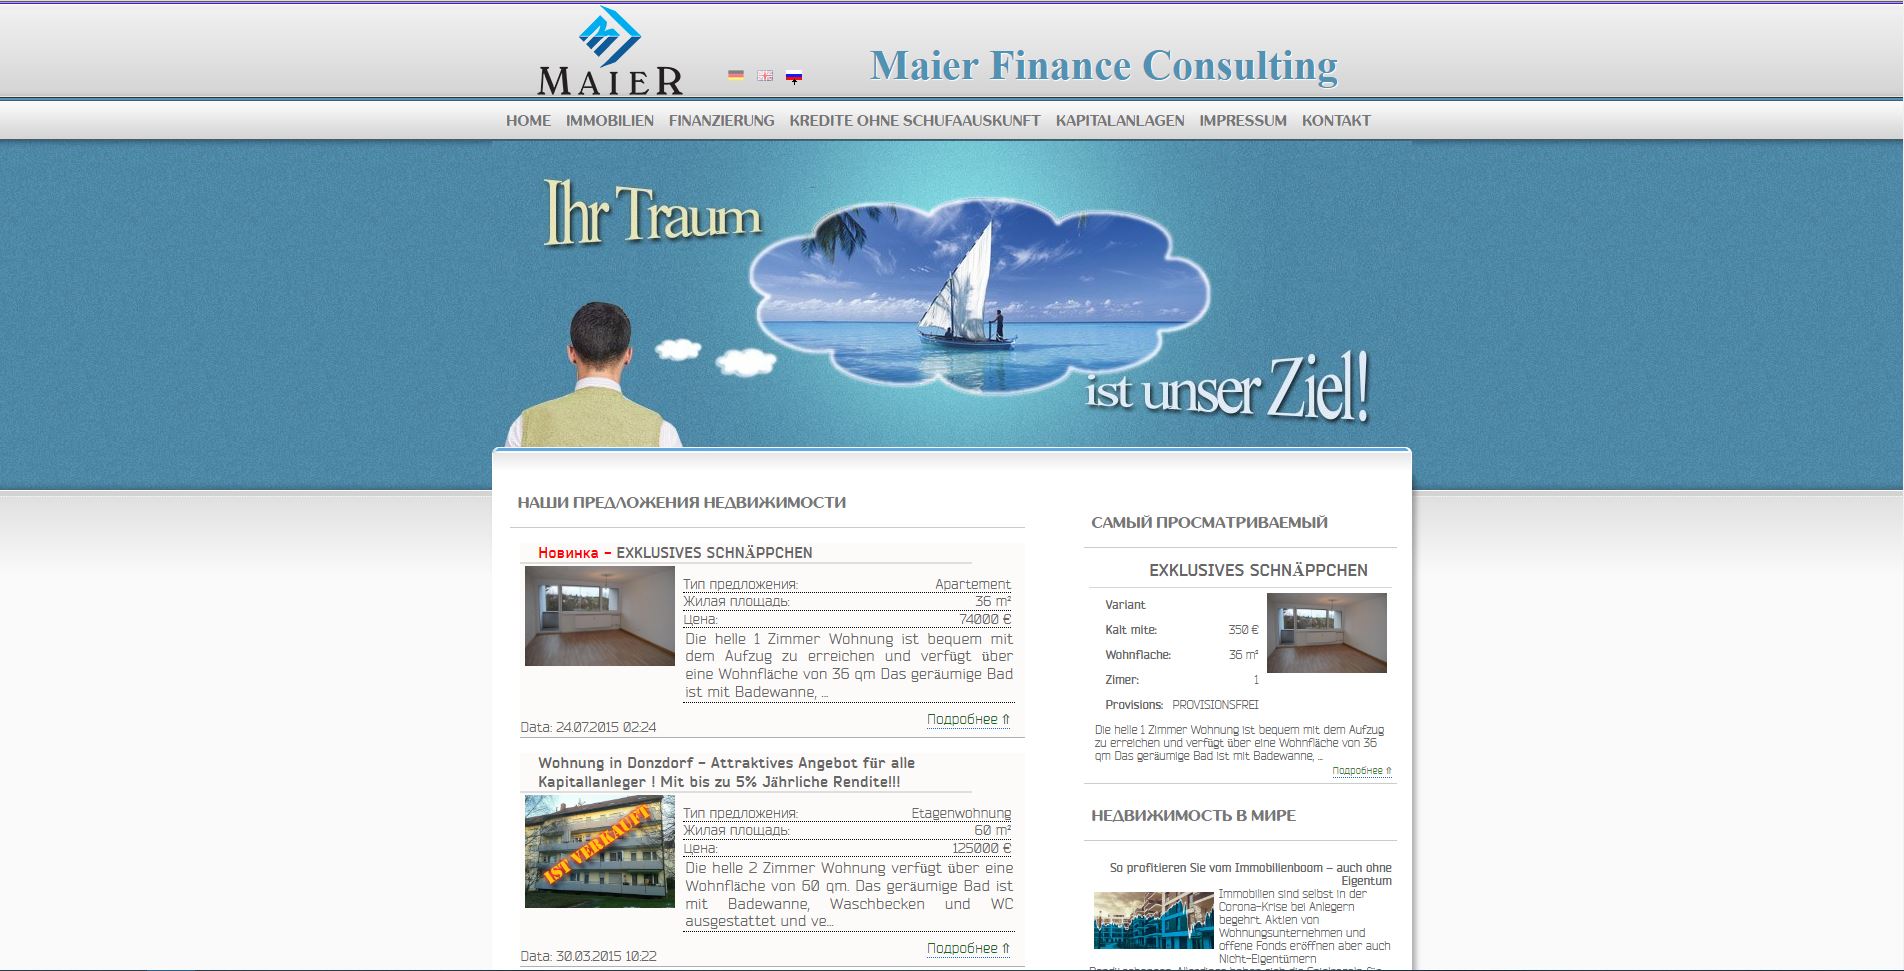 Maier Finance Consulting